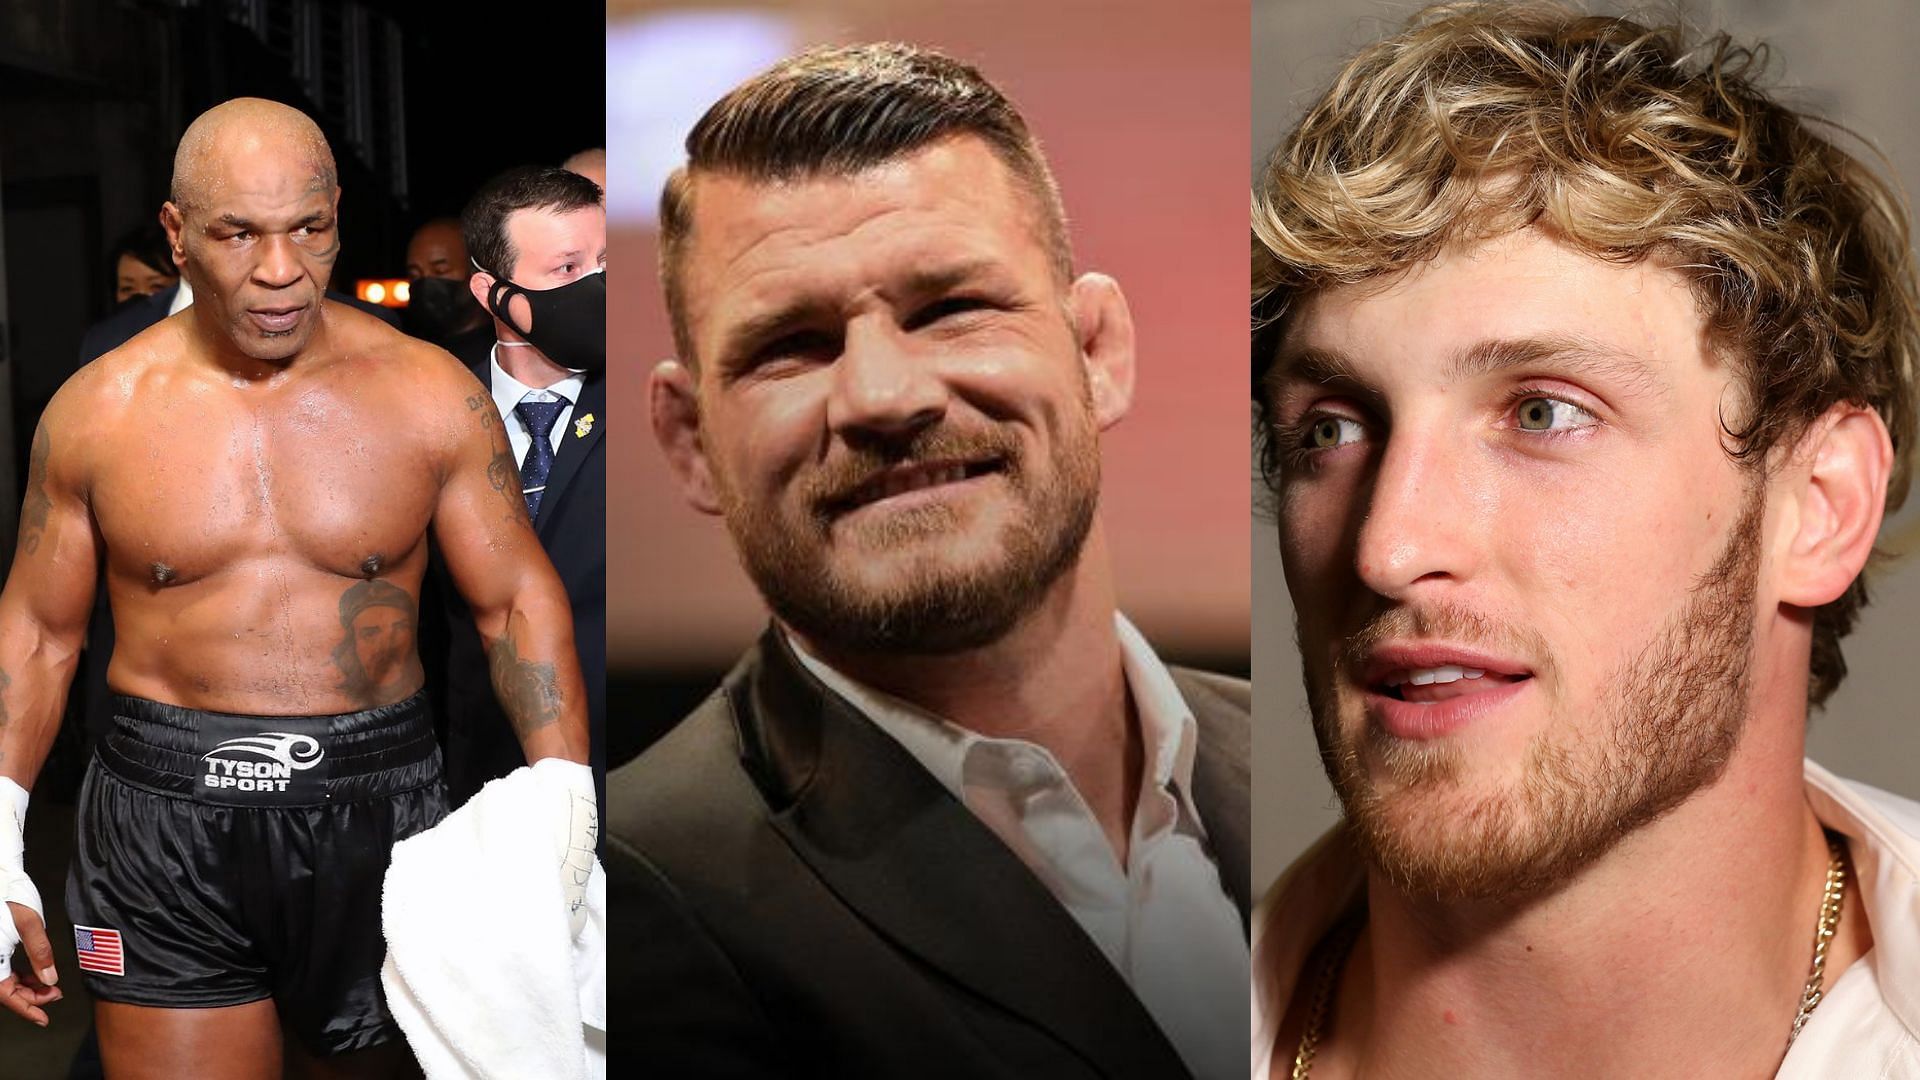 Michael Bisping (center) has previewed the Mike Tyson (left) vs. Logan Paul (right) fight